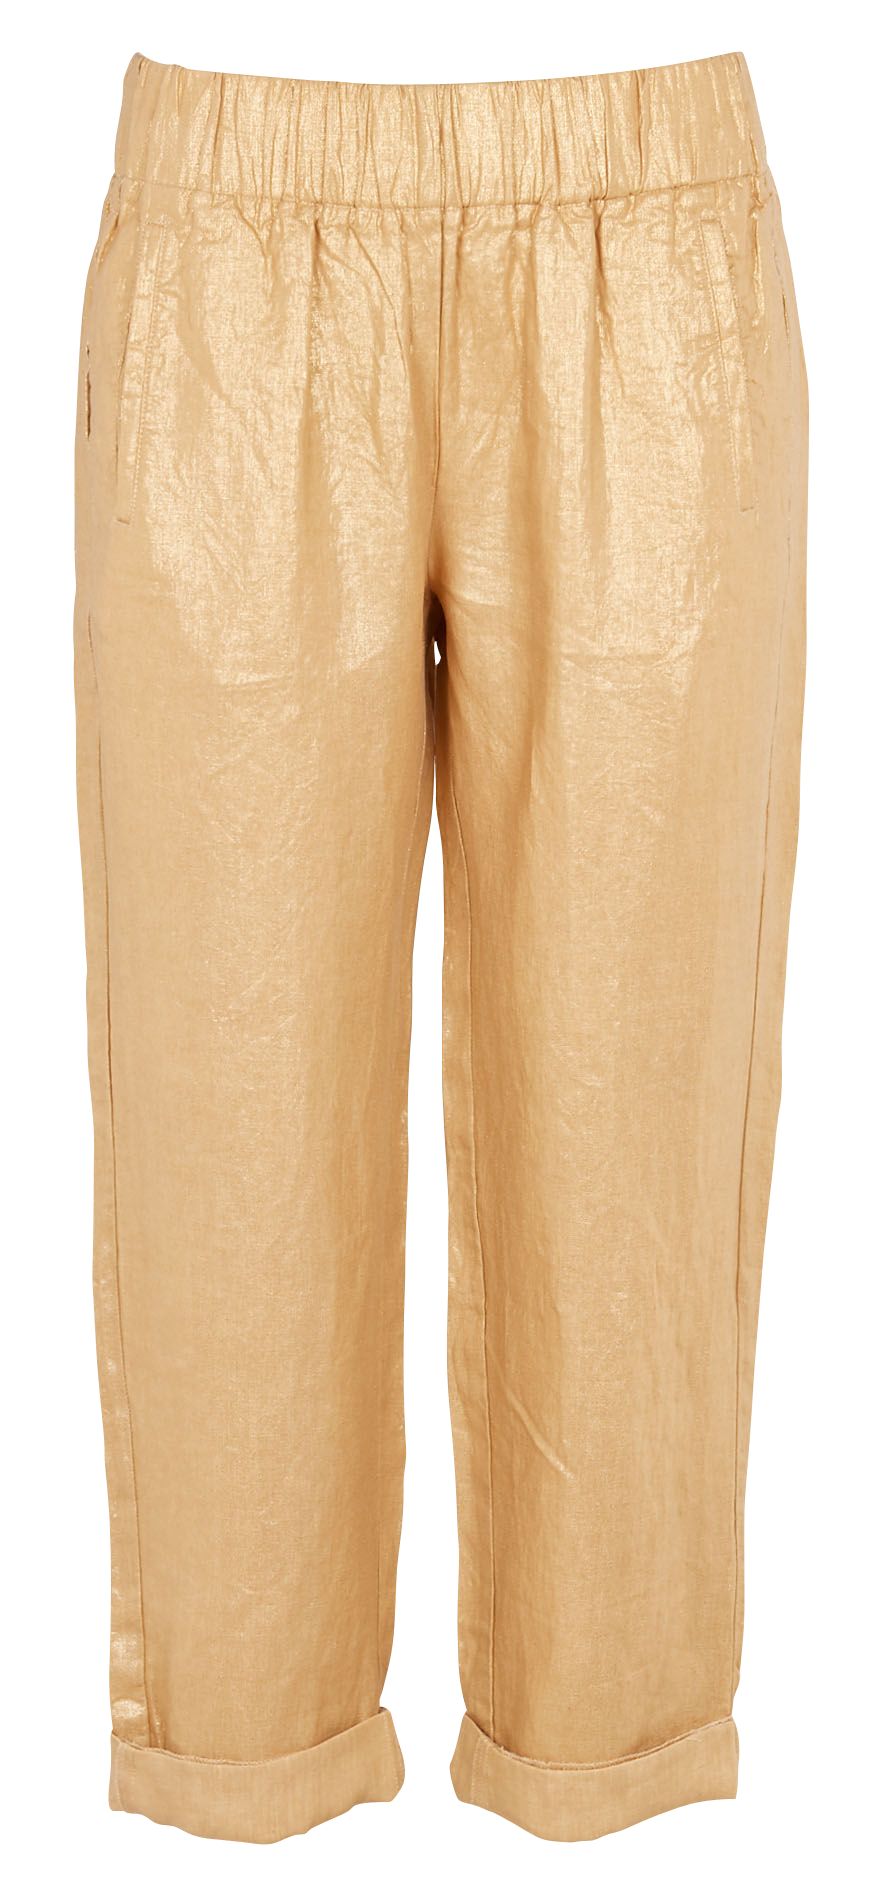 Diega Papao Gold Linen Pant